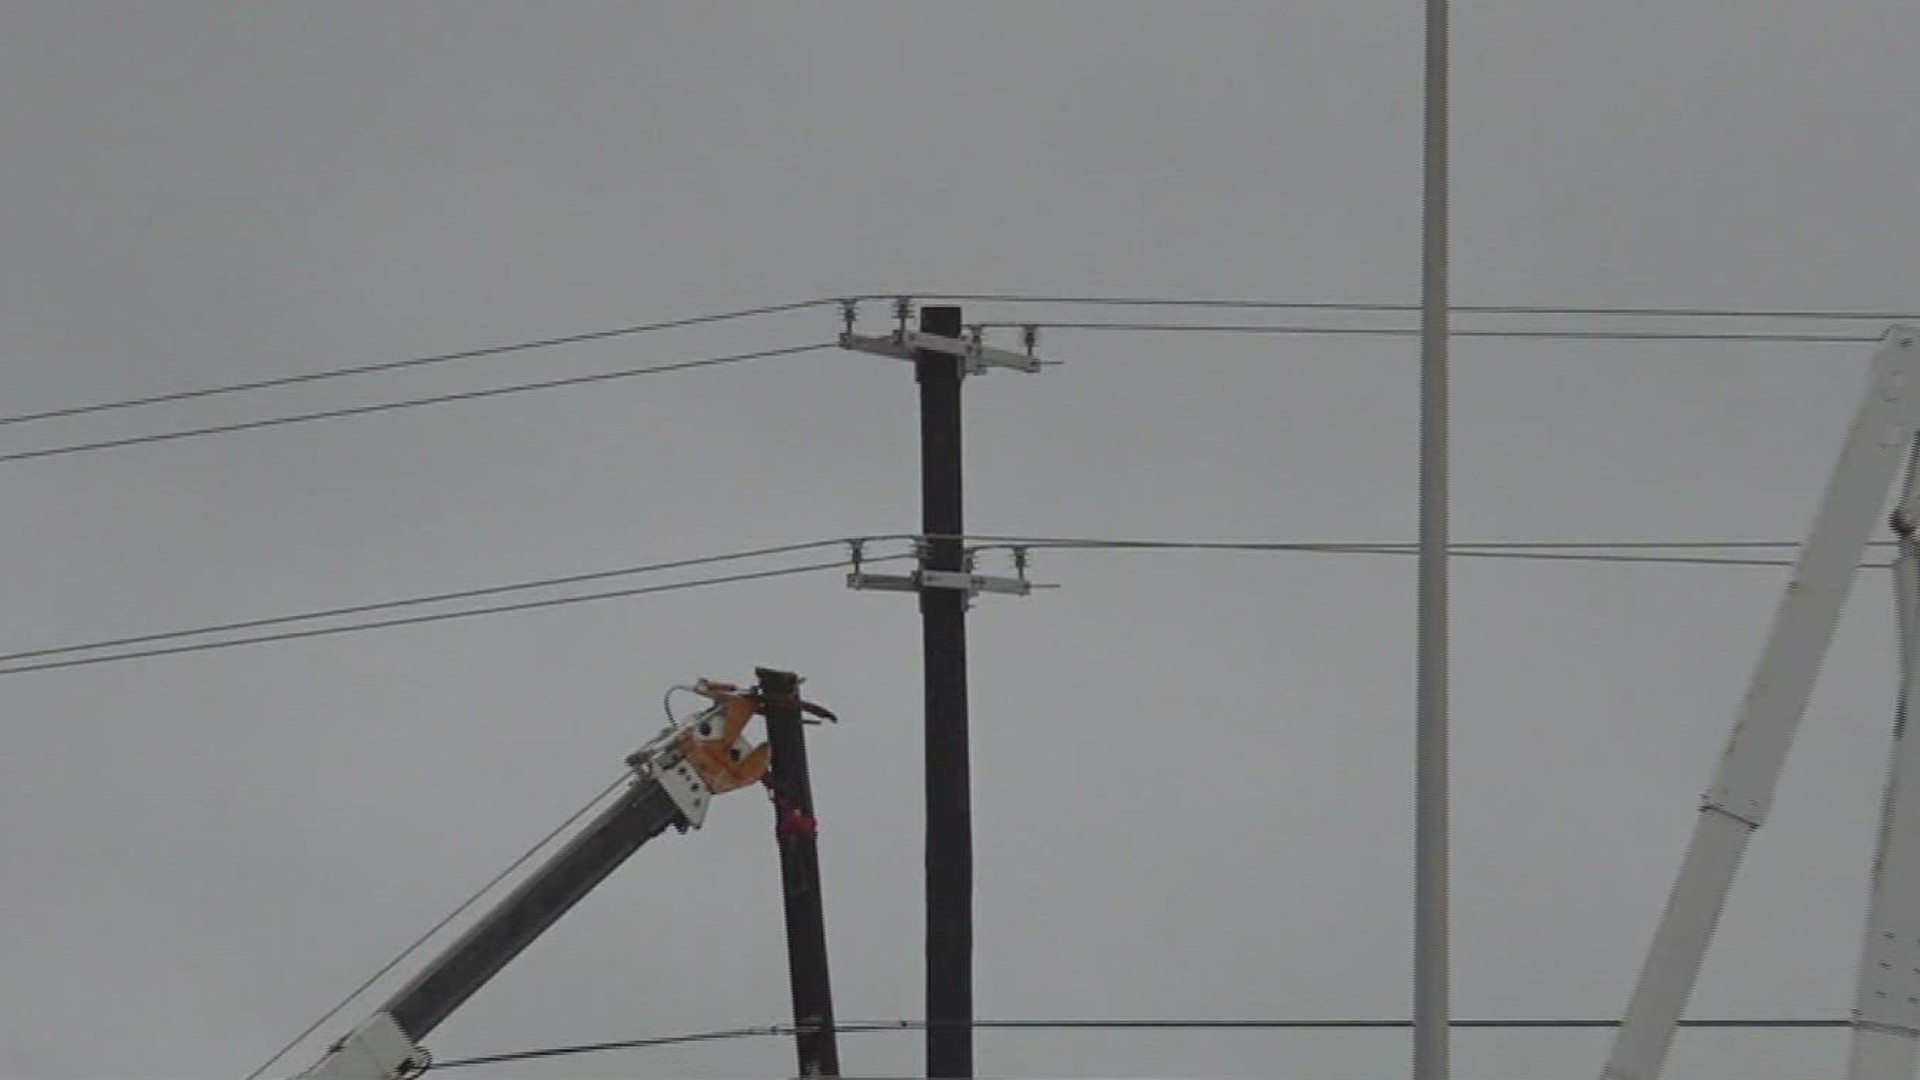 AEP-Texas and TxDOT are still addressing the broken power line leaning over the westbound side of the JFK Causeway.